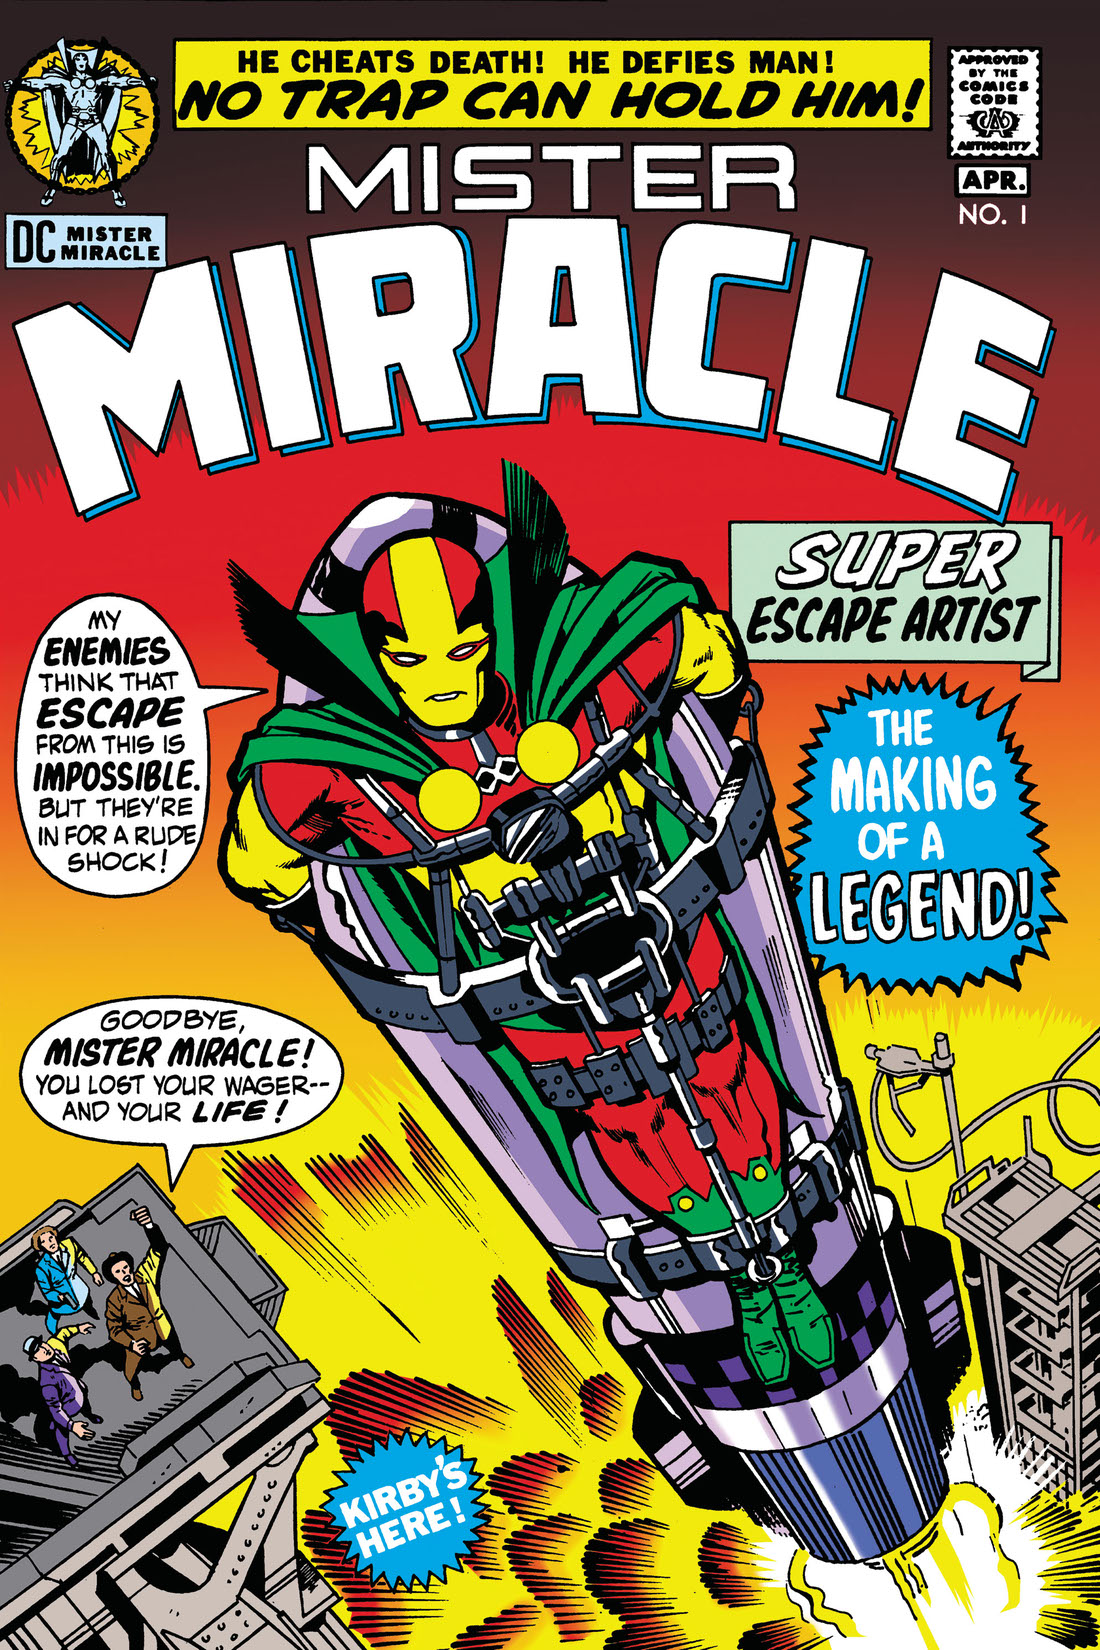 Mister Miracle (1971-) #1 preview images